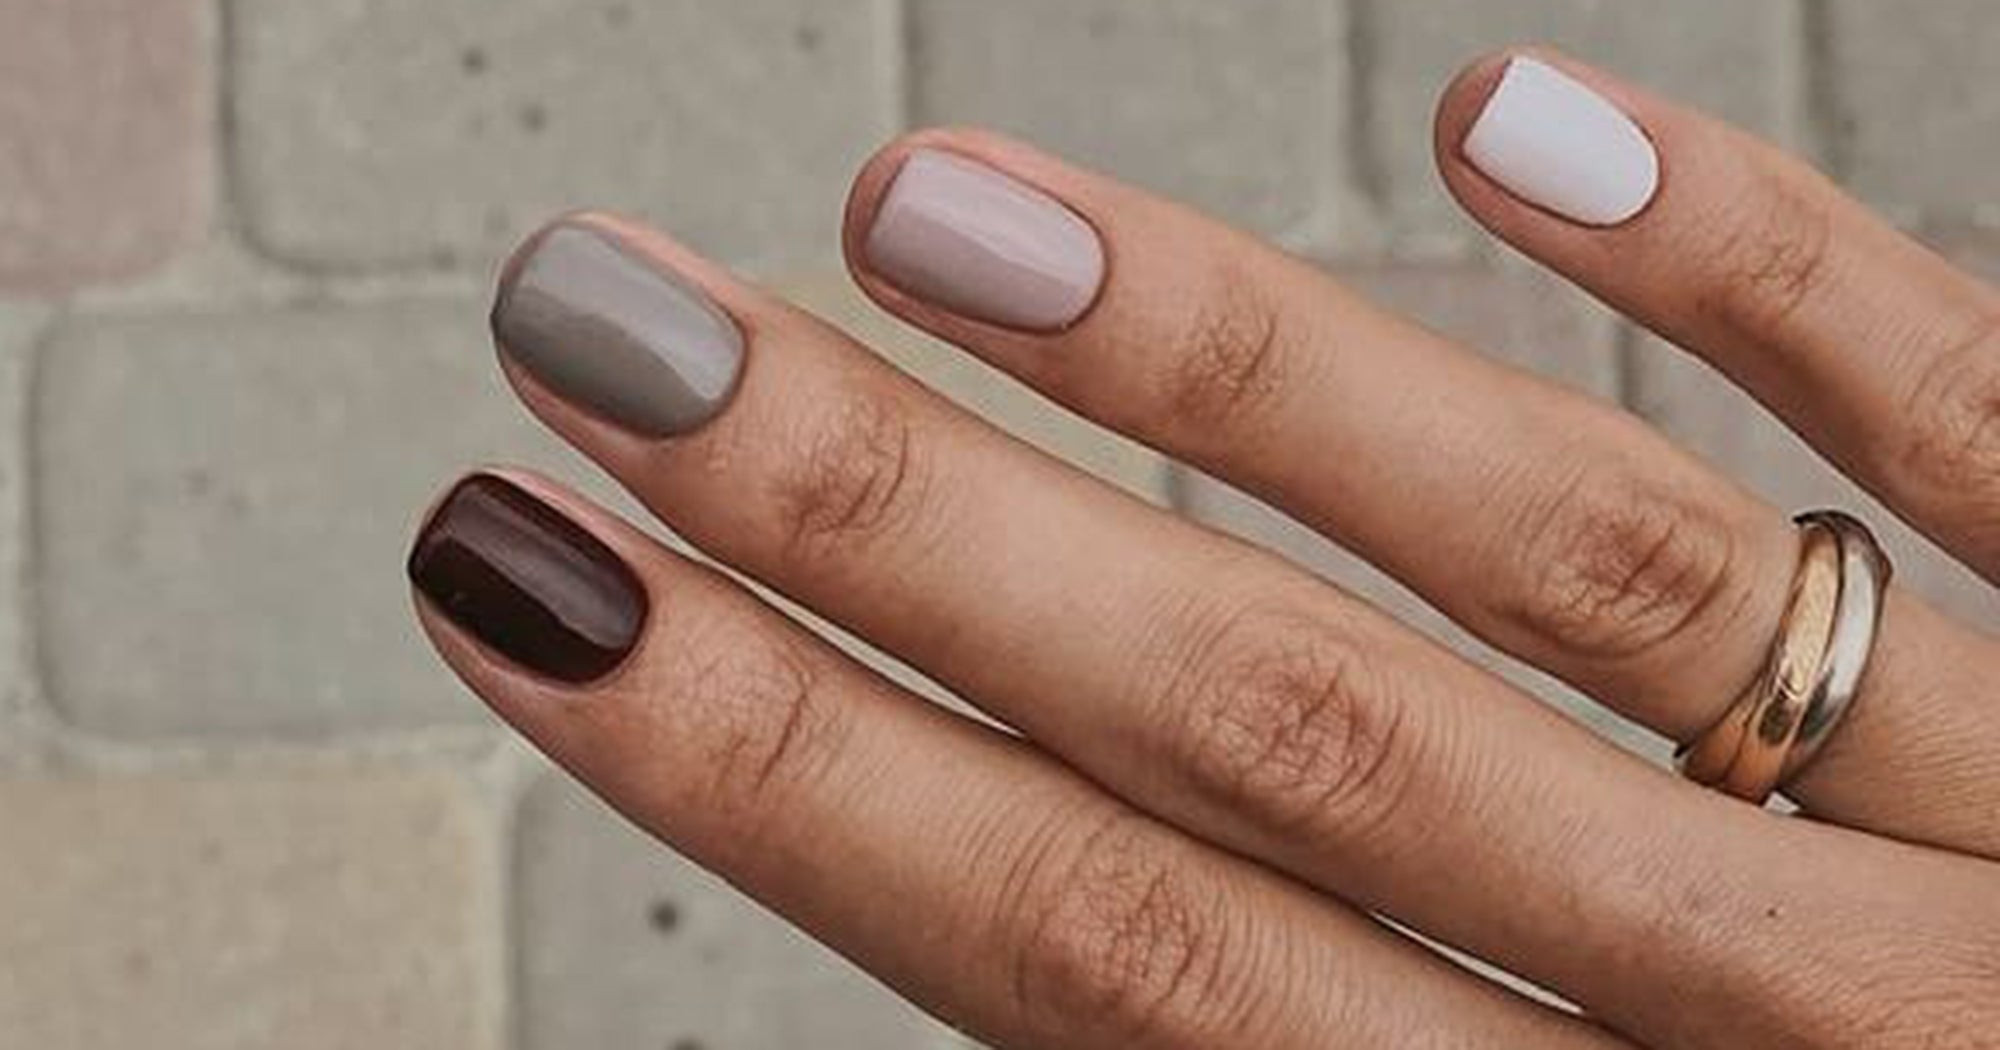 New Fall Nail Colors
 Best Fall Nail Polish Colors For A Trendy Manicure 2019